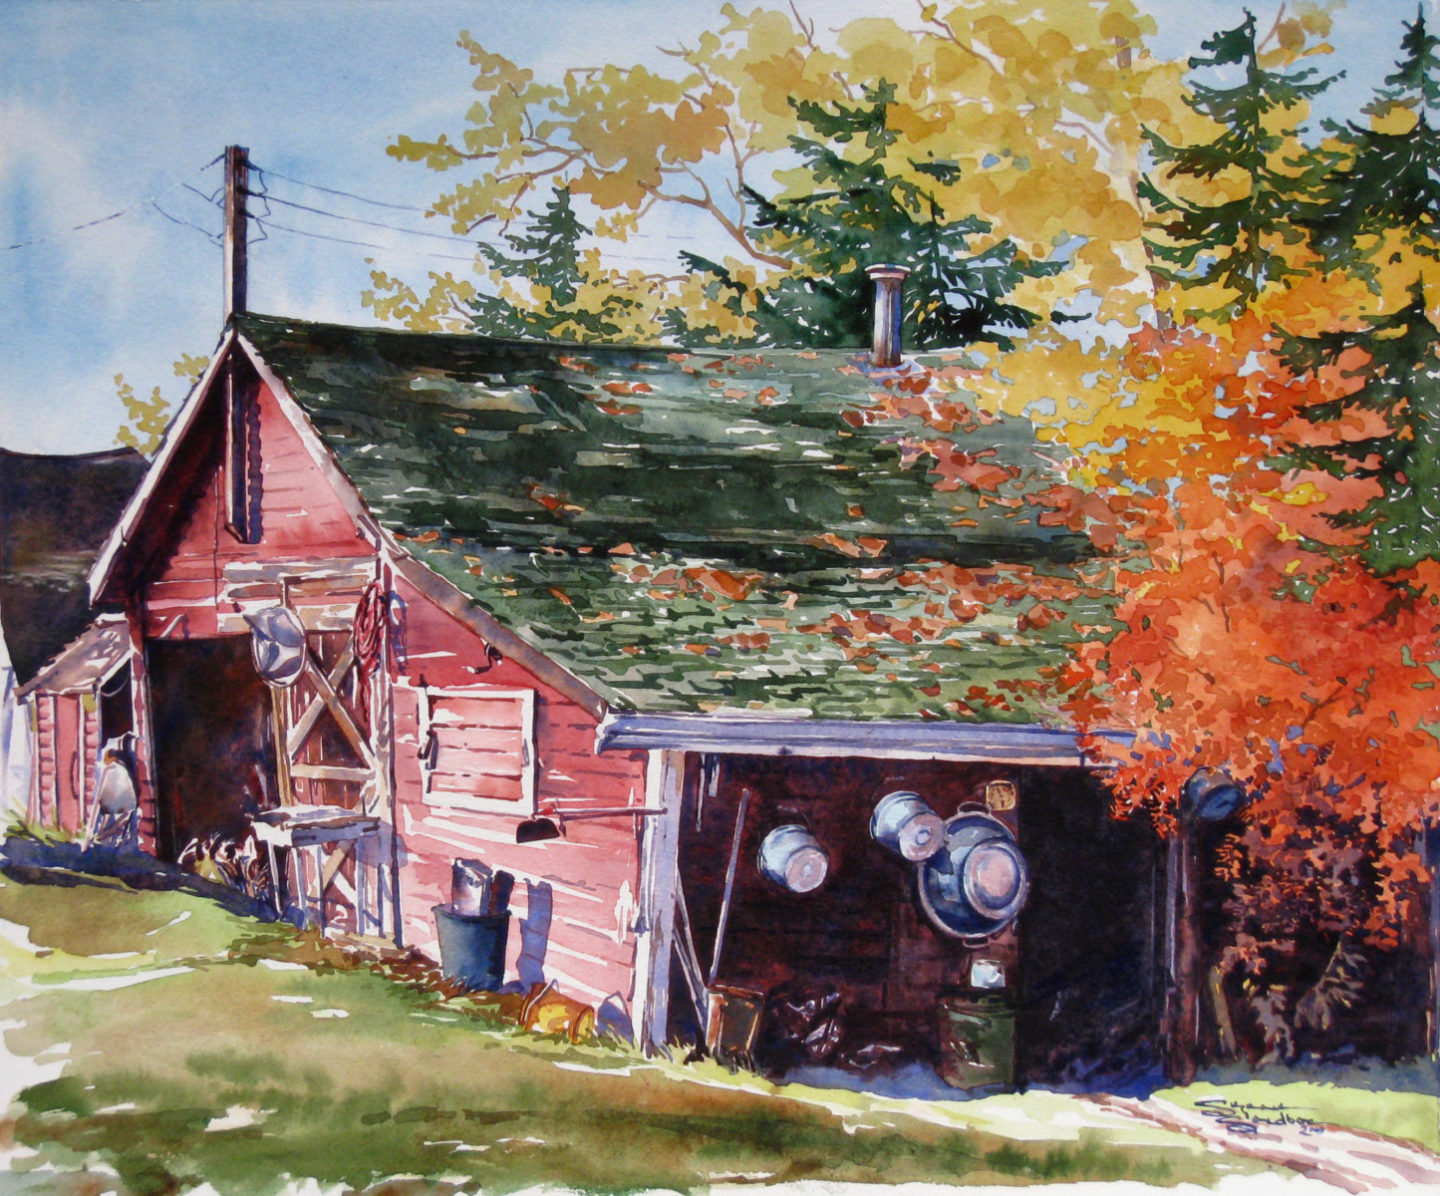 George's Place, 14x20, Watercolor, 2009 - 